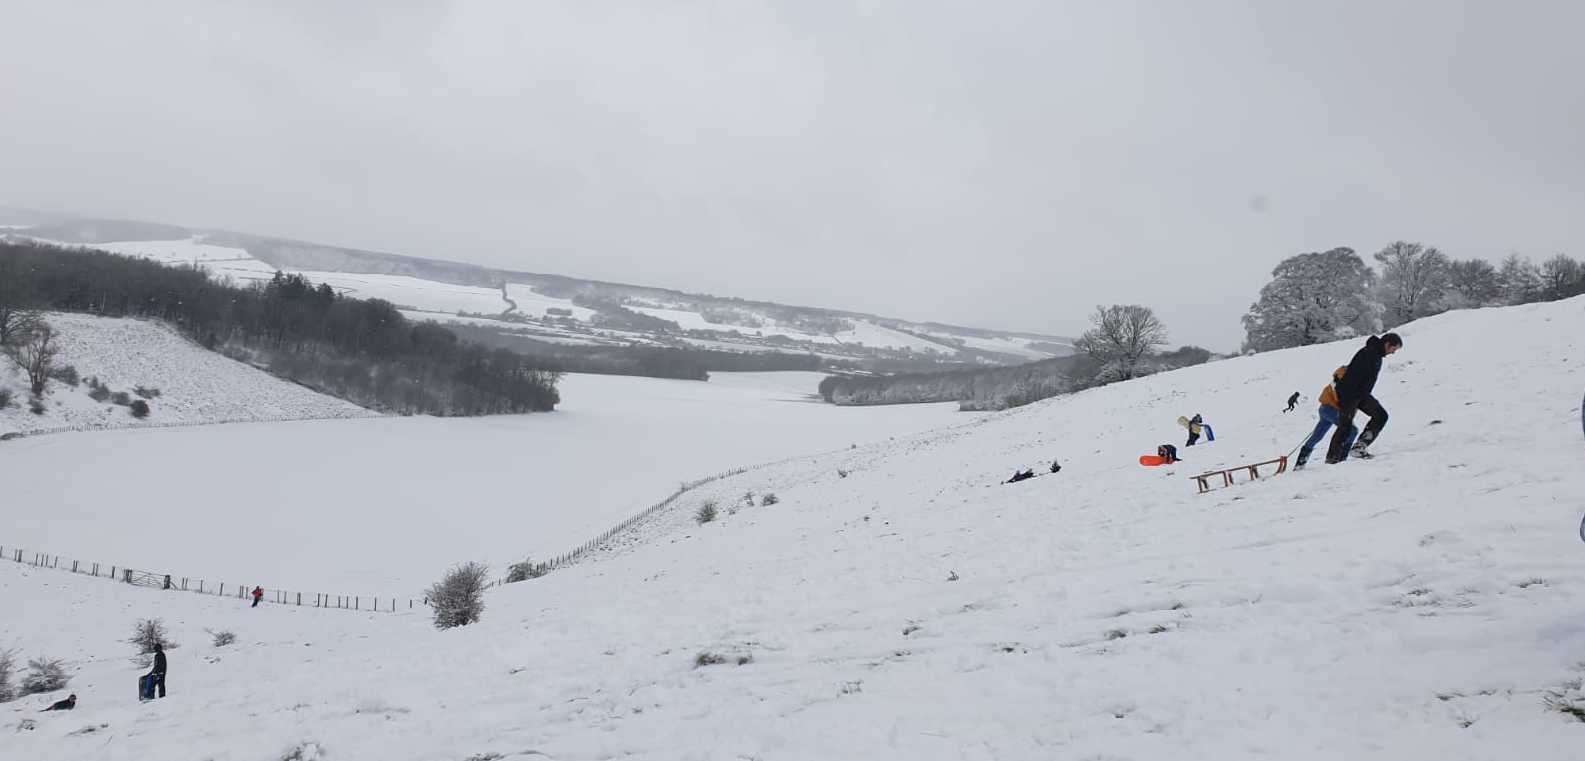 Sledging in the snow near the old racecourse in Wye